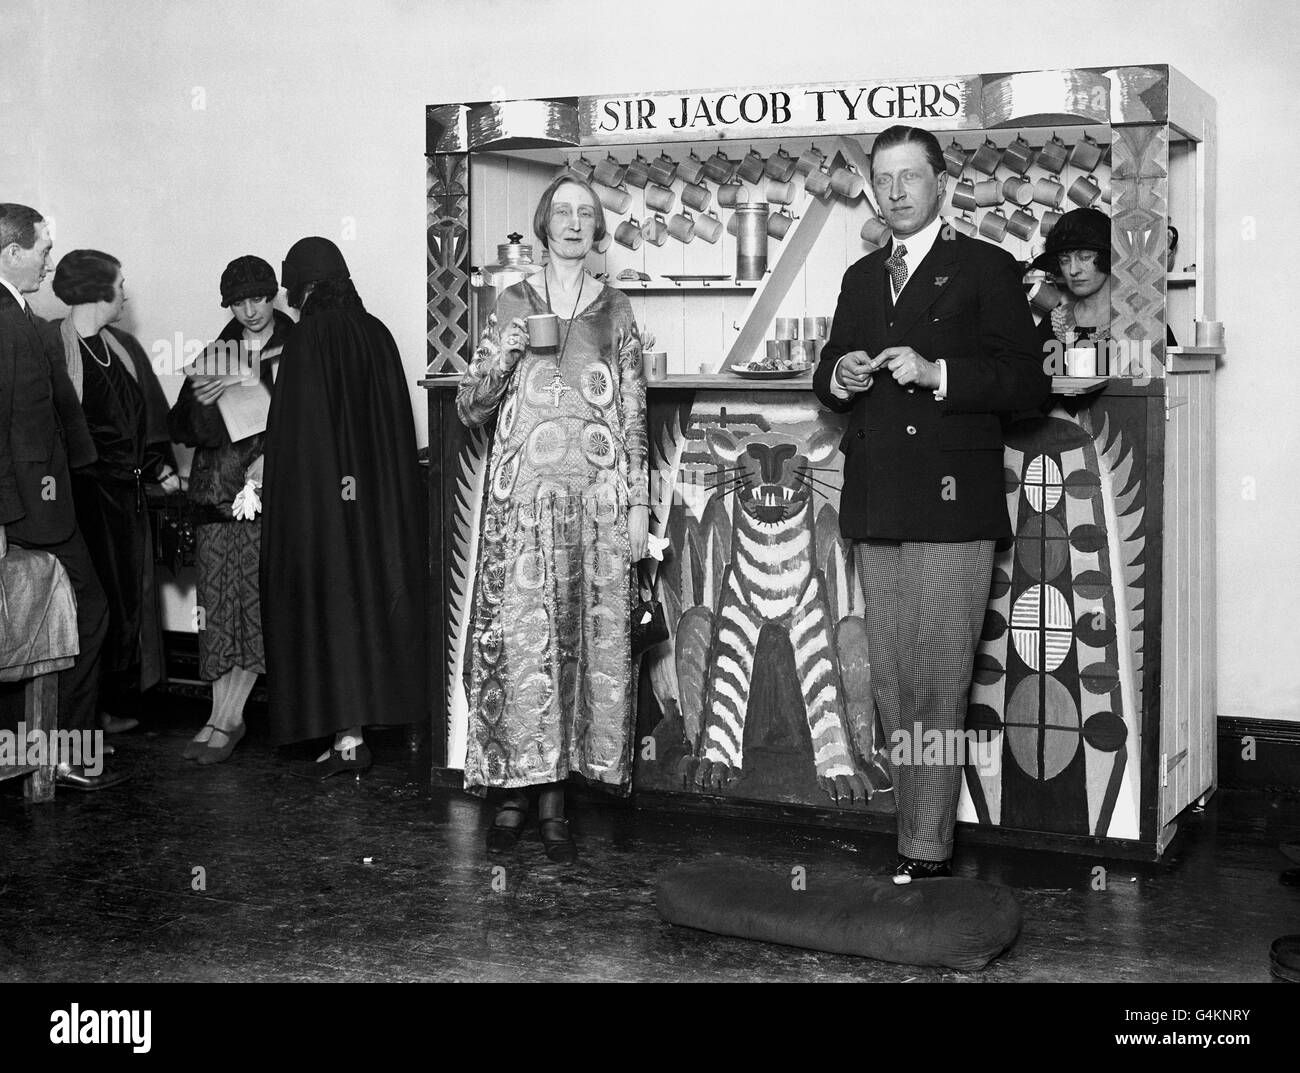 The novel and artistic 'Jazz' coffee stall which is a feature at the 'At Homes' of the Arts League of Service at Robert Street, Adelphi. Miss Edith Sitwell and her brother Osbert are seen taking refreshment. The gentleman on the extreme left is William Walton. Stock Photo